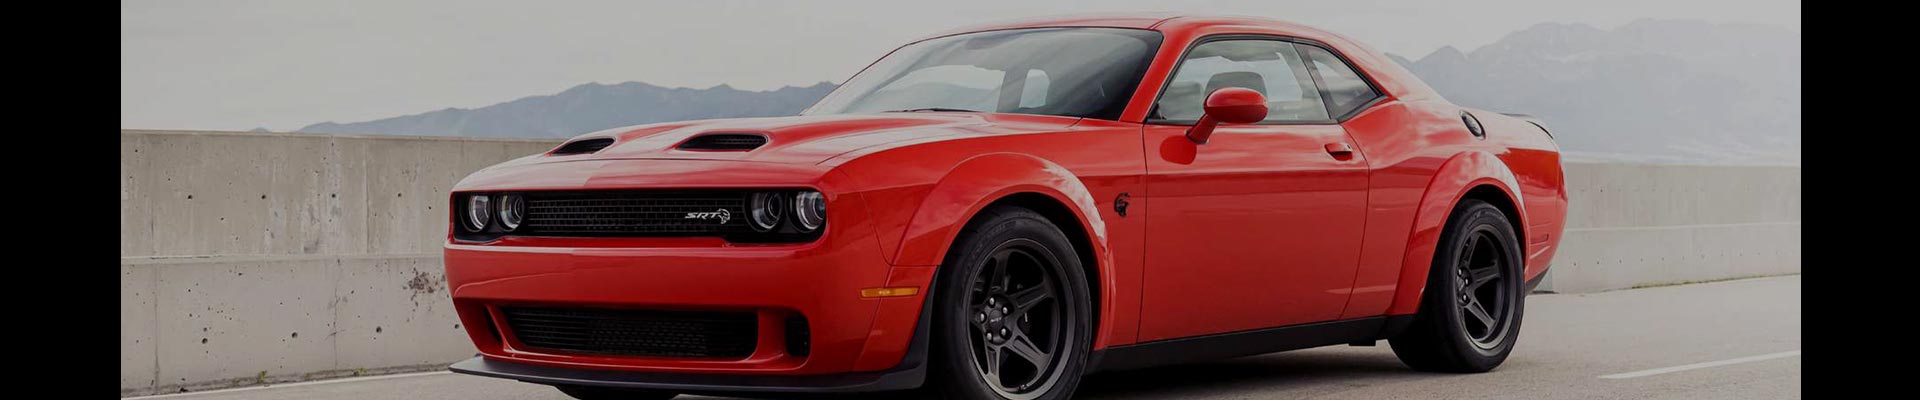 Shop Replacement and OEM 2017 Dodge Challenger Parts with Discounted Price on the Net